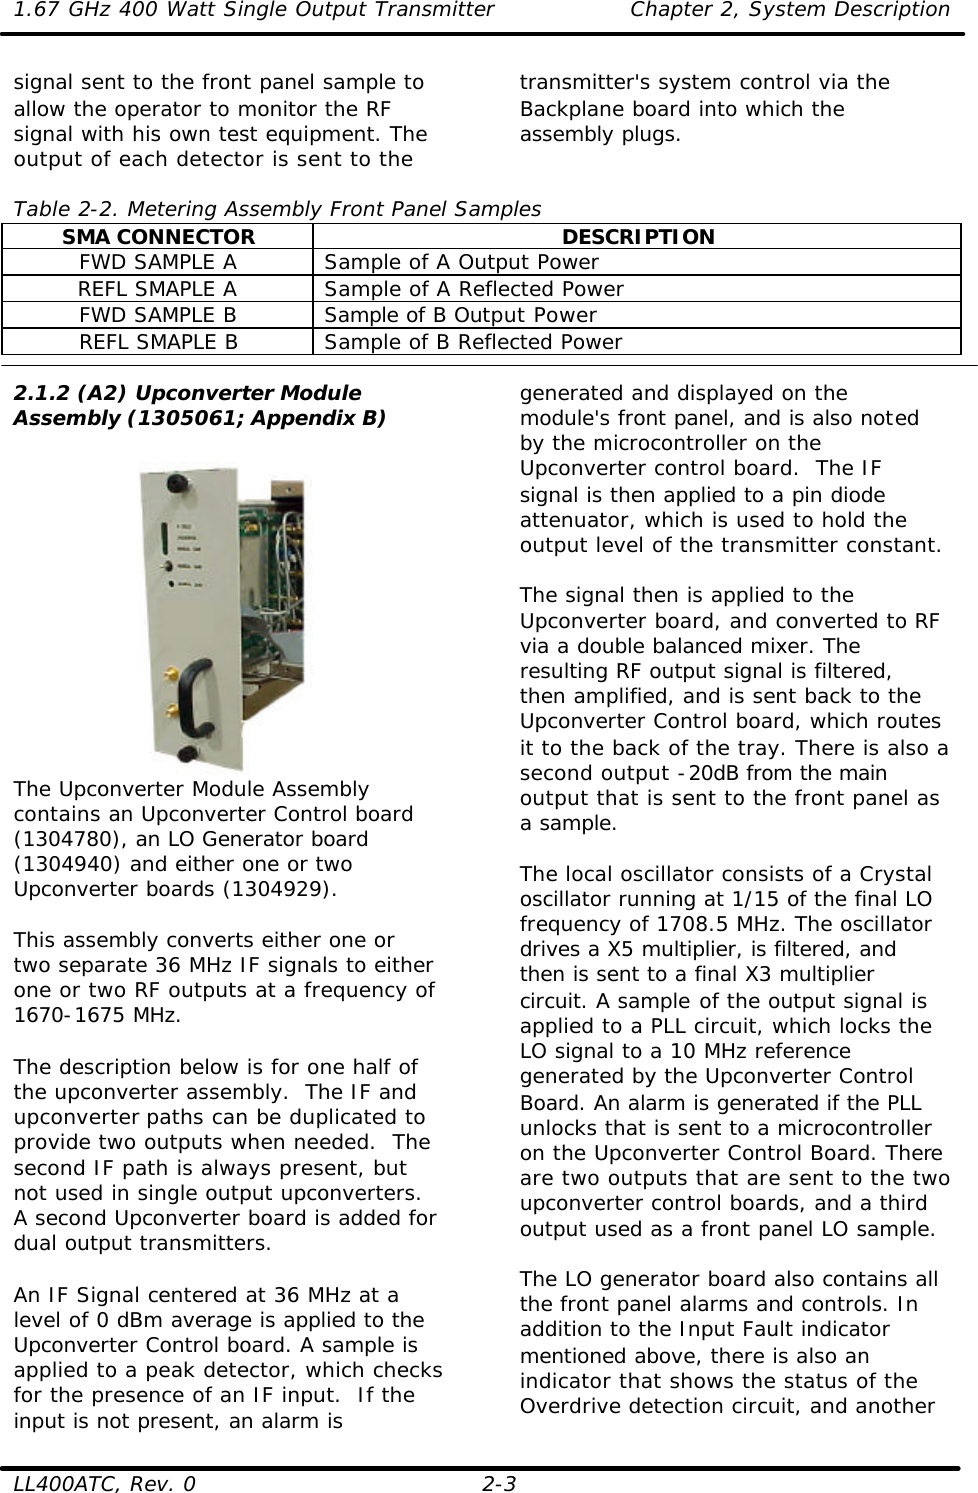 1.67 GHz 400 Watt Single Output Transmitter Chapter 2, System Description  LL400ATC, Rev. 0 2-3 signal sent to the front panel sample to allow the operator to monitor the RF signal with his own test equipment. The output of each detector is sent to the transmitter&apos;s system control via the Backplane board into which the assembly plugs.   Table 2-2. Metering Assembly Front Panel Samples SMA CONNECTOR DESCRIPTION FWD SAMPLE A Sample of A Output Power REFL SMAPLE A Sample of A Reflected Power FWD SAMPLE B Sample of B Output Power REFL SMAPLE B Sample of B Reflected Power  2.1.2 (A2) Upconverter Module Assembly (1305061; Appendix B)   The Upconverter Module Assembly contains an Upconverter Control board (1304780), an LO Generator board (1304940) and either one or two Upconverter boards (1304929).  This assembly converts either one or two separate 36 MHz IF signals to either one or two RF outputs at a frequency of 1670-1675 MHz.  The description below is for one half of the upconverter assembly.  The IF and upconverter paths can be duplicated to provide two outputs when needed.  The second IF path is always present, but not used in single output upconverters. A second Upconverter board is added for dual output transmitters.  An IF Signal centered at 36 MHz at a level of 0 dBm average is applied to the Upconverter Control board. A sample is applied to a peak detector, which checks for the presence of an IF input.  If the input is not present, an alarm is generated and displayed on the module&apos;s front panel, and is also noted by the microcontroller on the Upconverter control board.  The IF signal is then applied to a pin diode attenuator, which is used to hold the output level of the transmitter constant.   The signal then is applied to the Upconverter board, and converted to RF via a double balanced mixer. The resulting RF output signal is filtered, then amplified, and is sent back to the Upconverter Control board, which routes it to the back of the tray. There is also a second output -20dB from the main output that is sent to the front panel as a sample.   The local oscillator consists of a Crystal oscillator running at 1/15 of the final LO frequency of 1708.5 MHz. The oscillator drives a X5 multiplier, is filtered, and then is sent to a final X3 multiplier circuit. A sample of the output signal is applied to a PLL circuit, which locks the LO signal to a 10 MHz reference generated by the Upconverter Control Board. An alarm is generated if the PLL unlocks that is sent to a microcontroller on the Upconverter Control Board. There are two outputs that are sent to the two upconverter control boards, and a third output used as a front panel LO sample.   The LO generator board also contains all the front panel alarms and controls. In addition to the Input Fault indicator mentioned above, there is also an indicator that shows the status of the Overdrive detection circuit, and another 